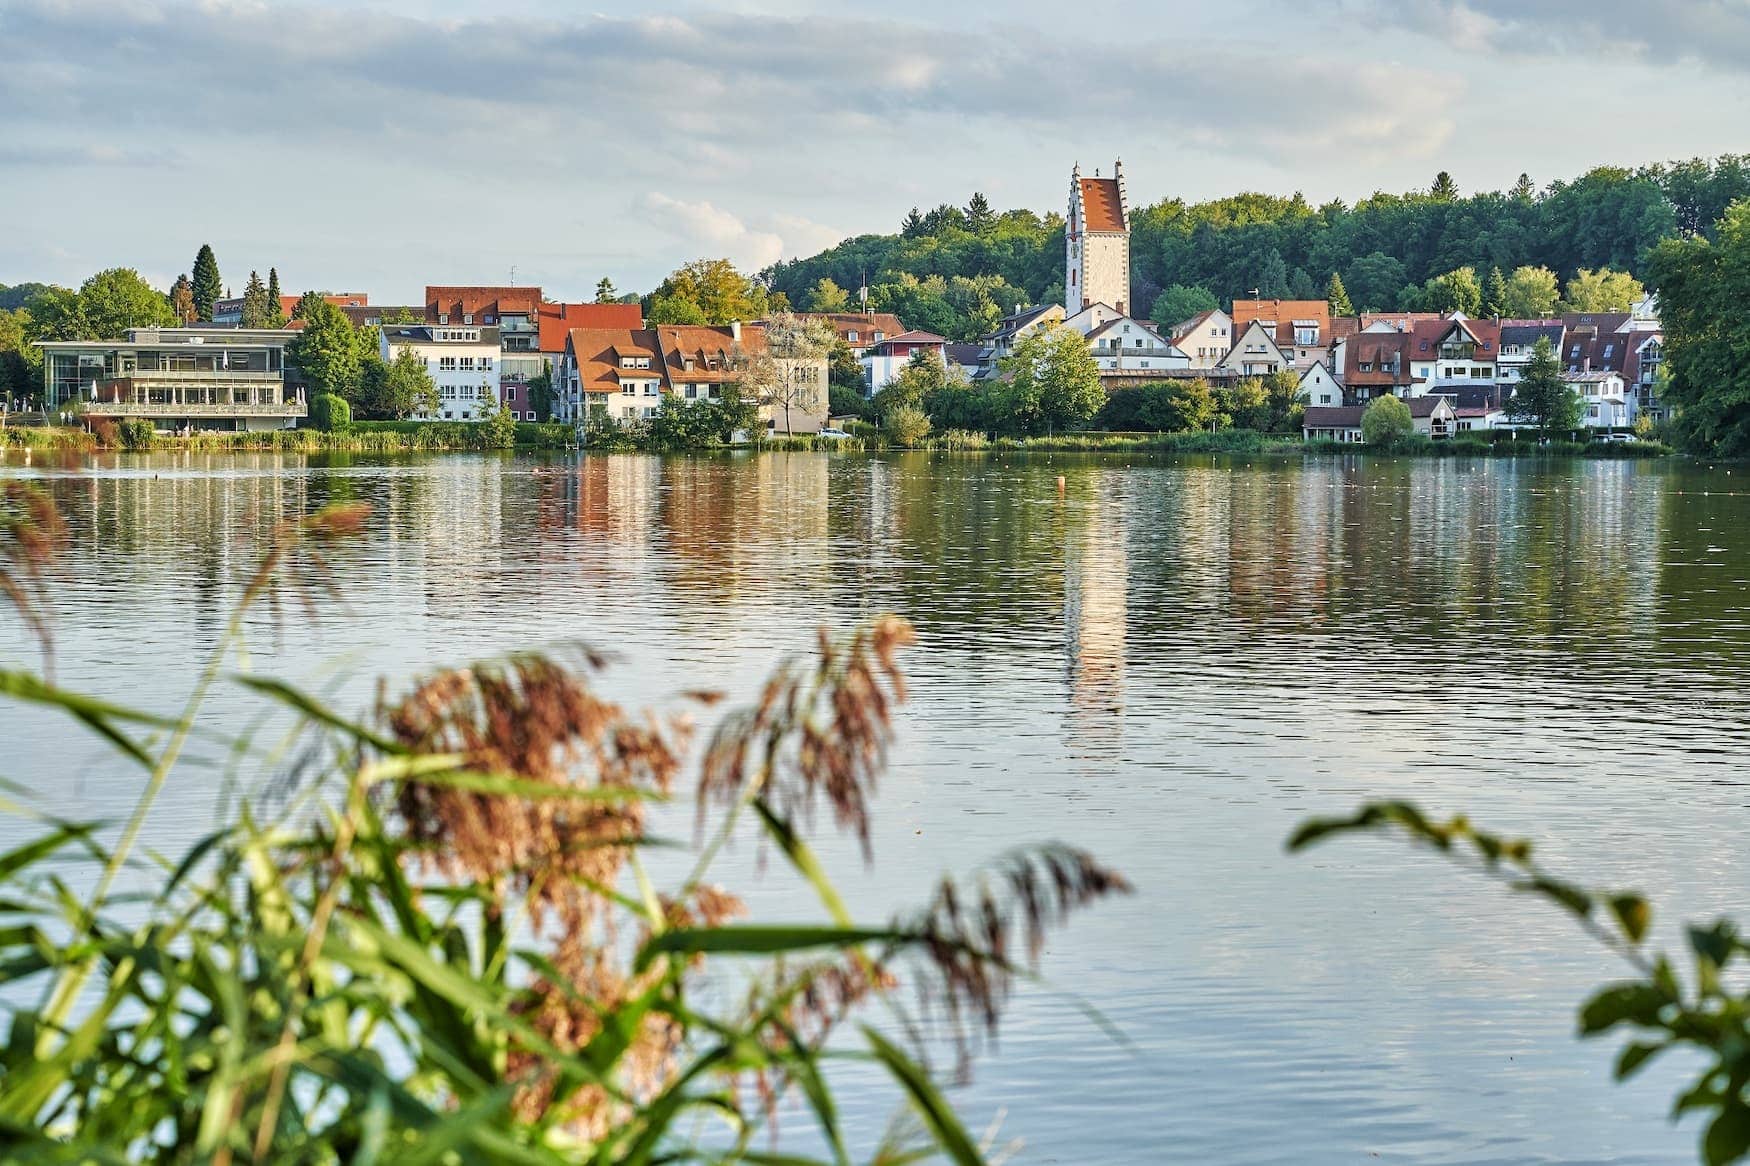 Located in the heart of Bad Waldsee, the Stadtsee is a haven of tranquillity in the midst of the small-town hustle and bustle.